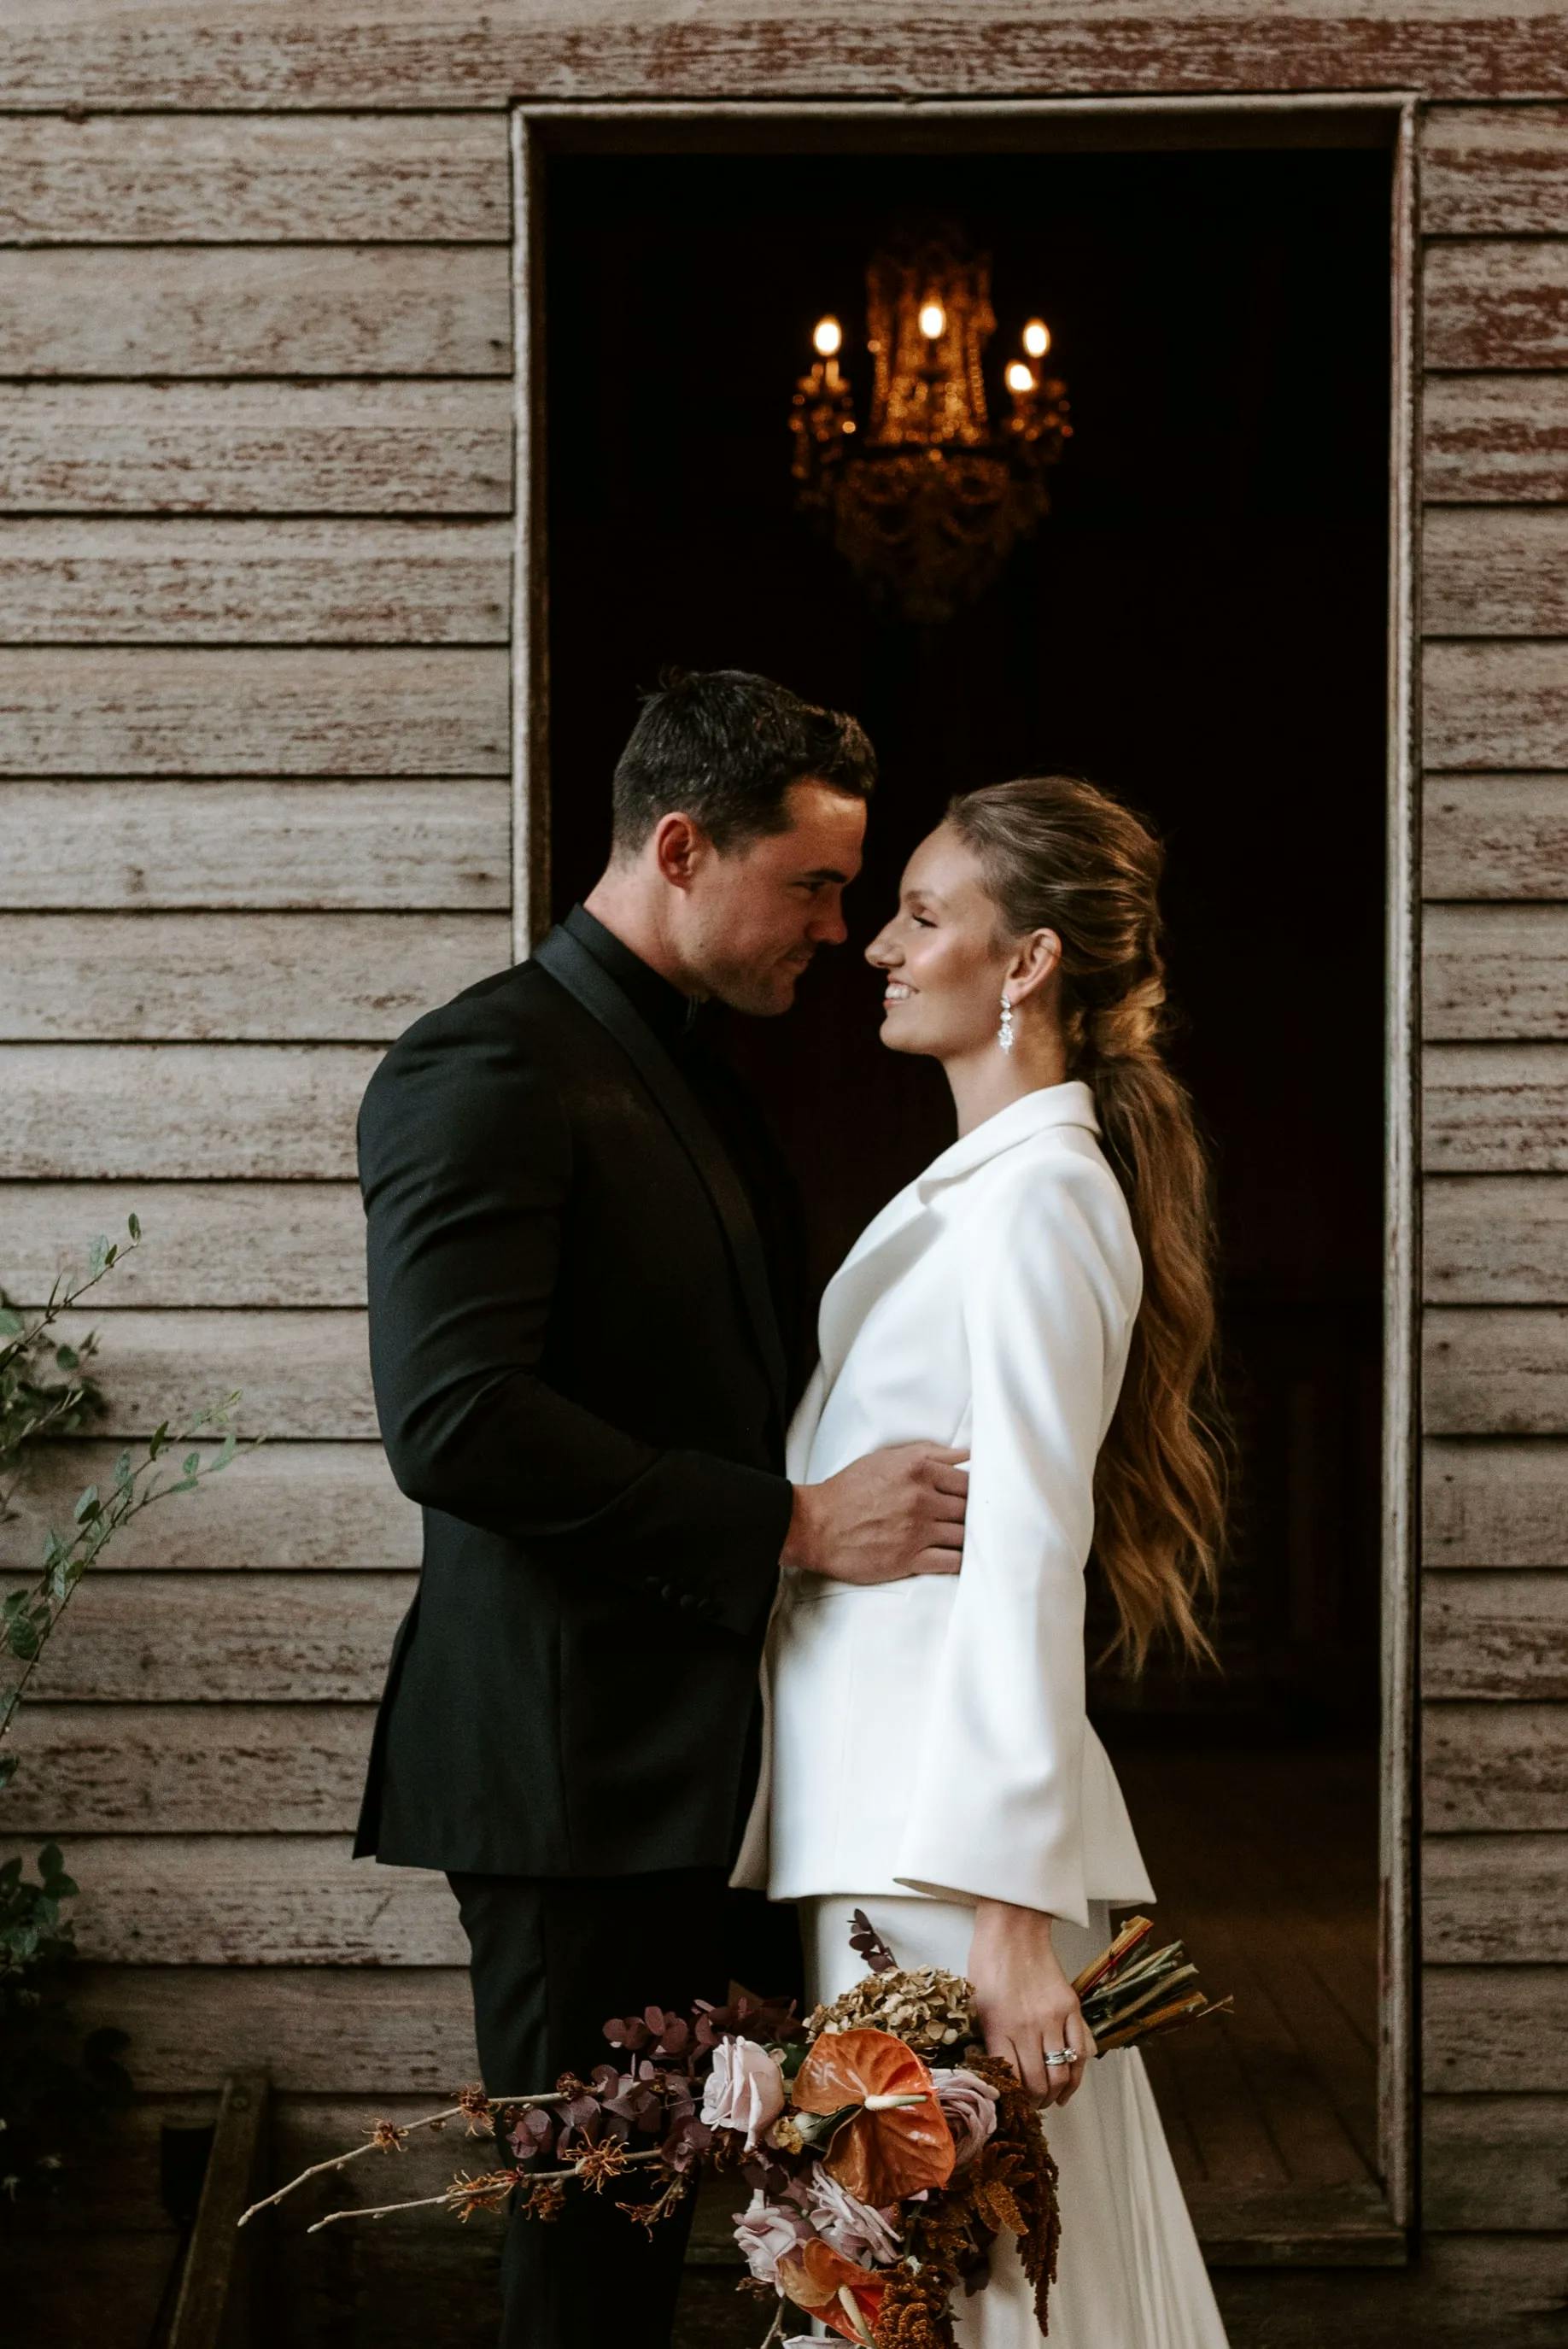 A couple embraces in front of a rustic wooden wall with a dark open doorway behind them. The man is dressed in a black suit, while the woman wears a white outfit and holds a bouquet of flowers. A chandelier is visible in the background.